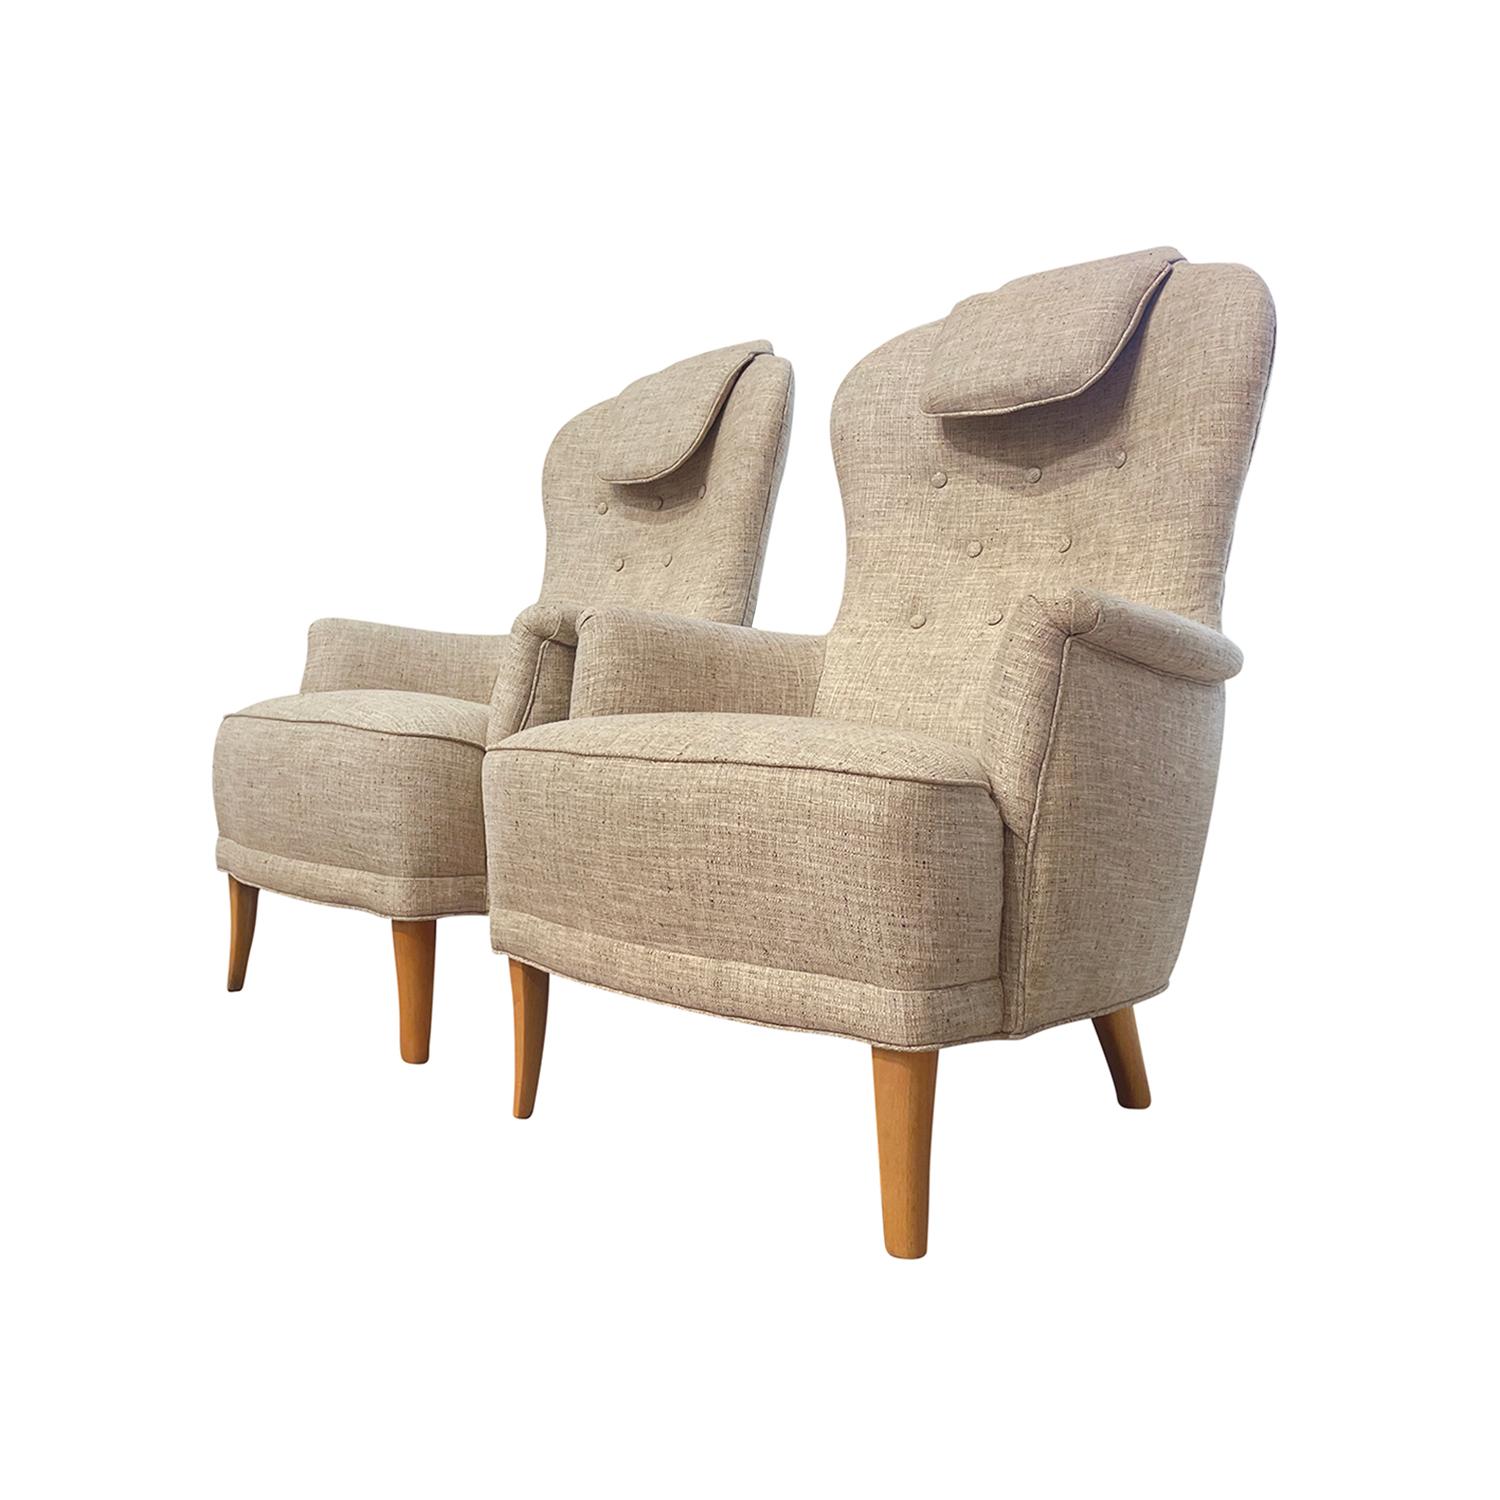 Hand-Carved 20th Century Swedish Pair of Vintage O.H. Sjögren Armchairs by Carl Malmsten For Sale